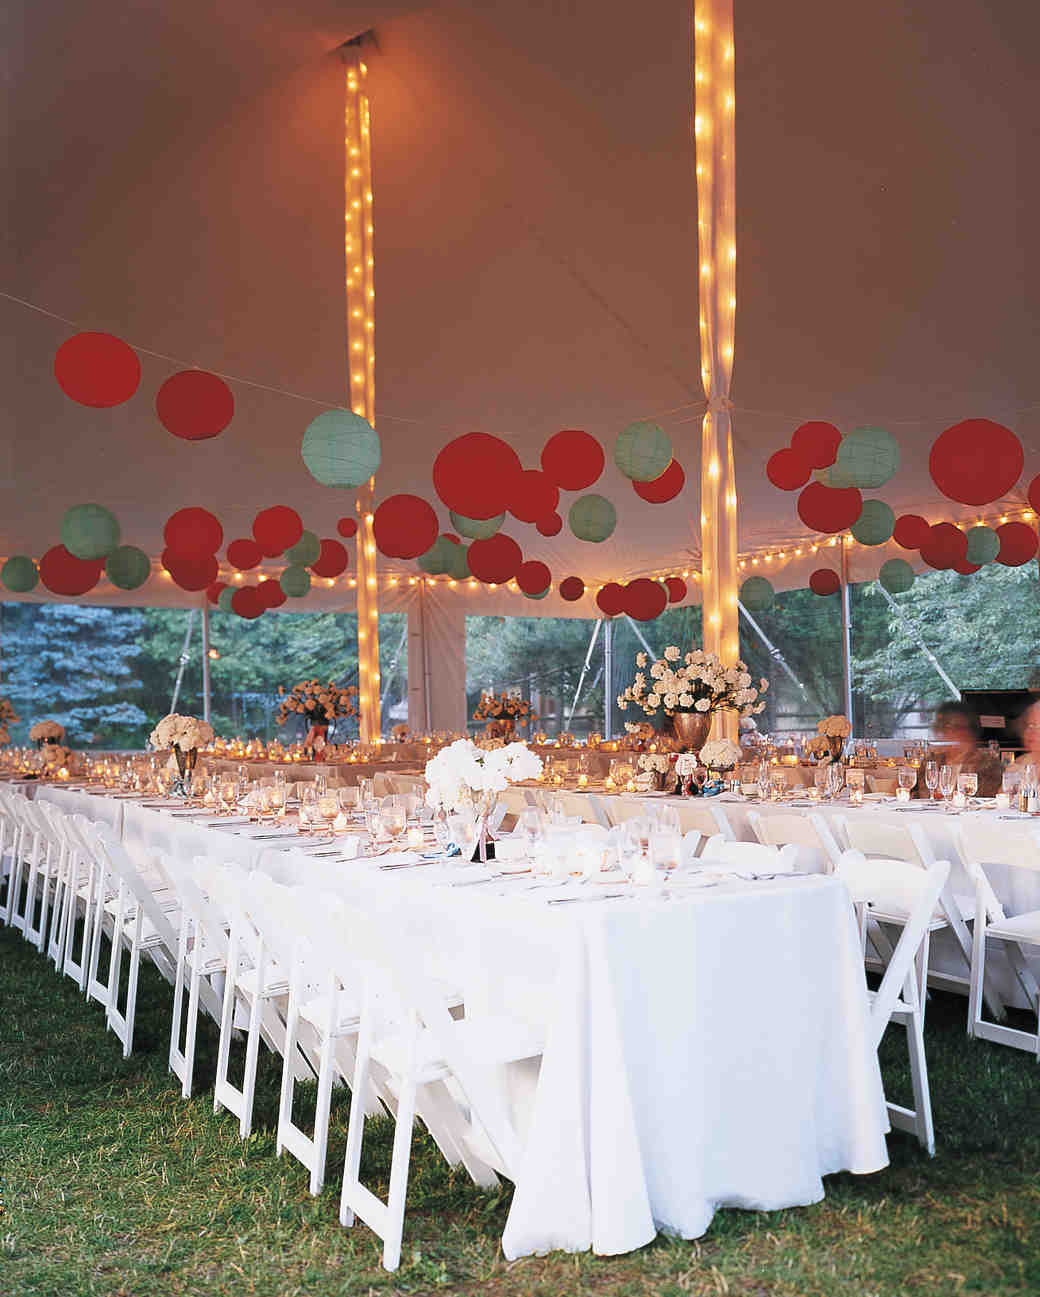 How To Decorate For A Wedding Reception
 33 Tent Decorating Ideas to Upgrade Your Wedding Reception